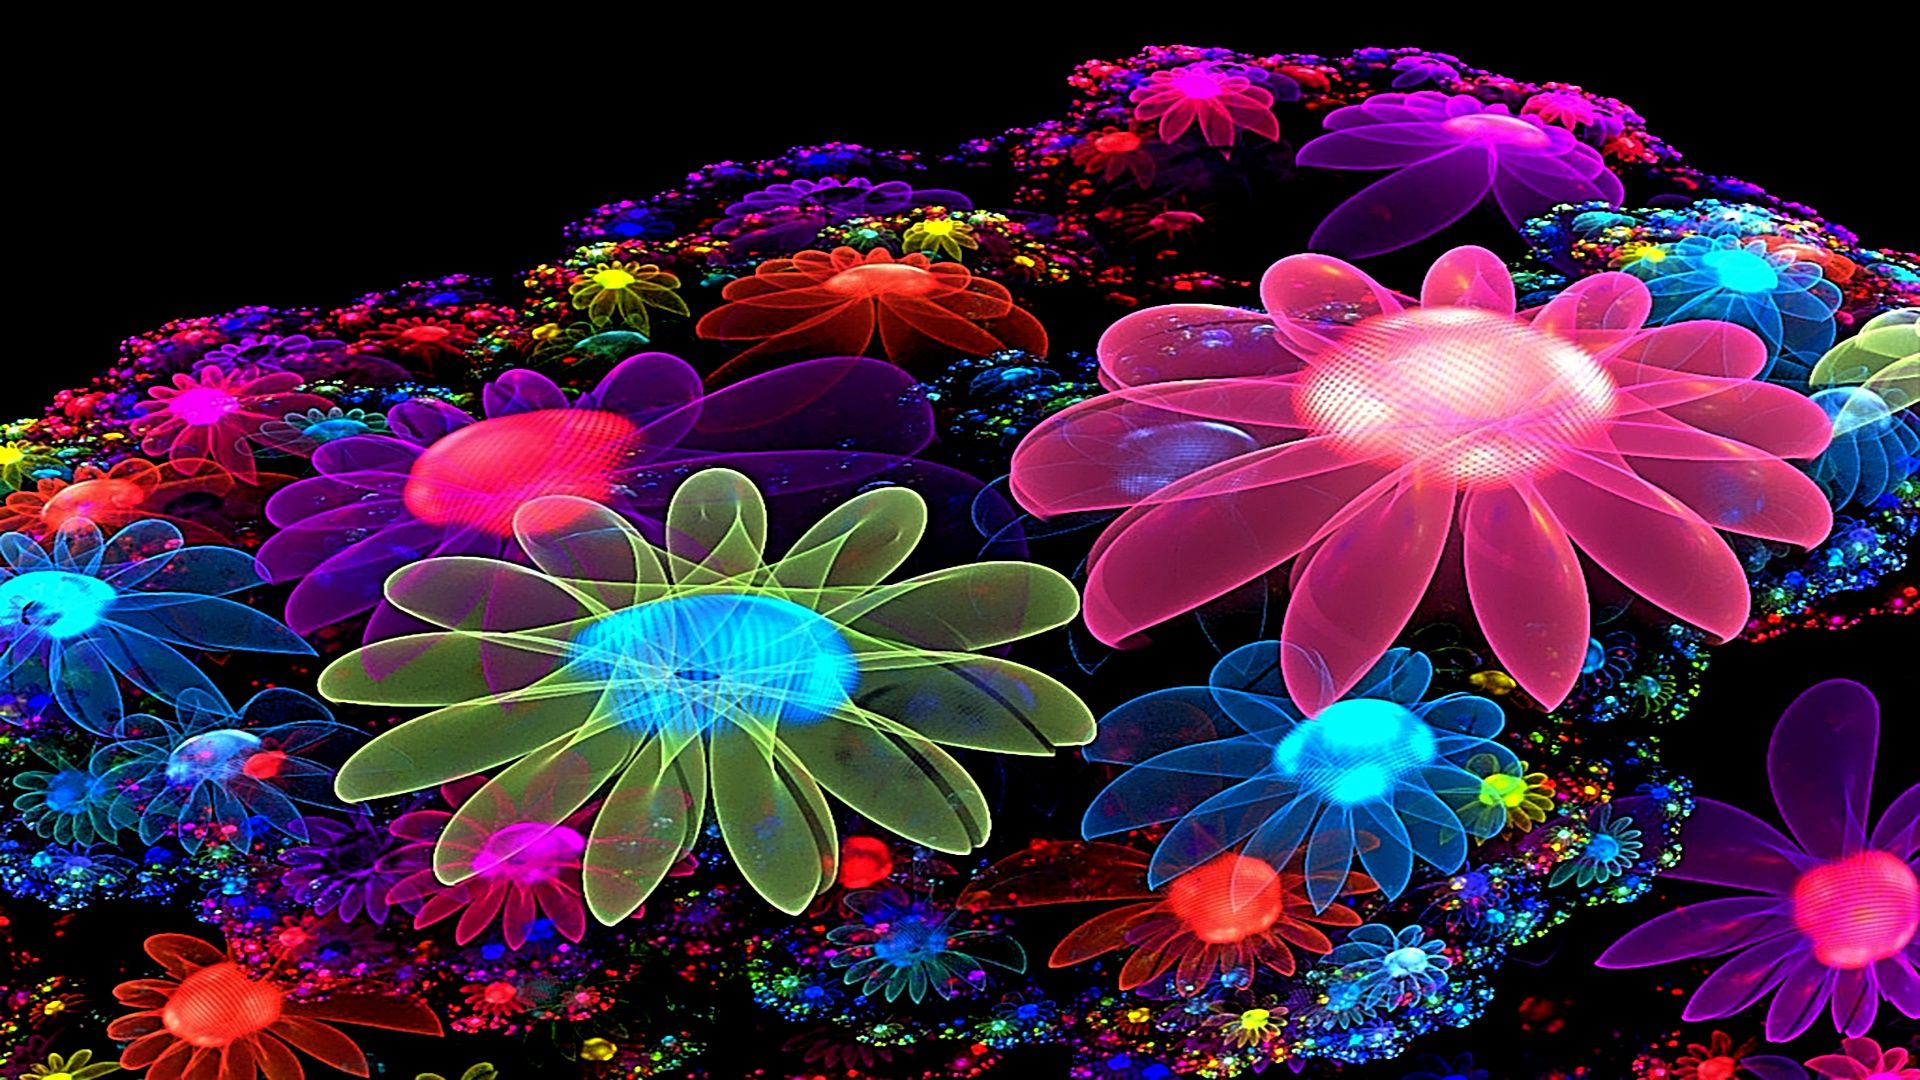 Pictures > cool colorful abstract backgrounds